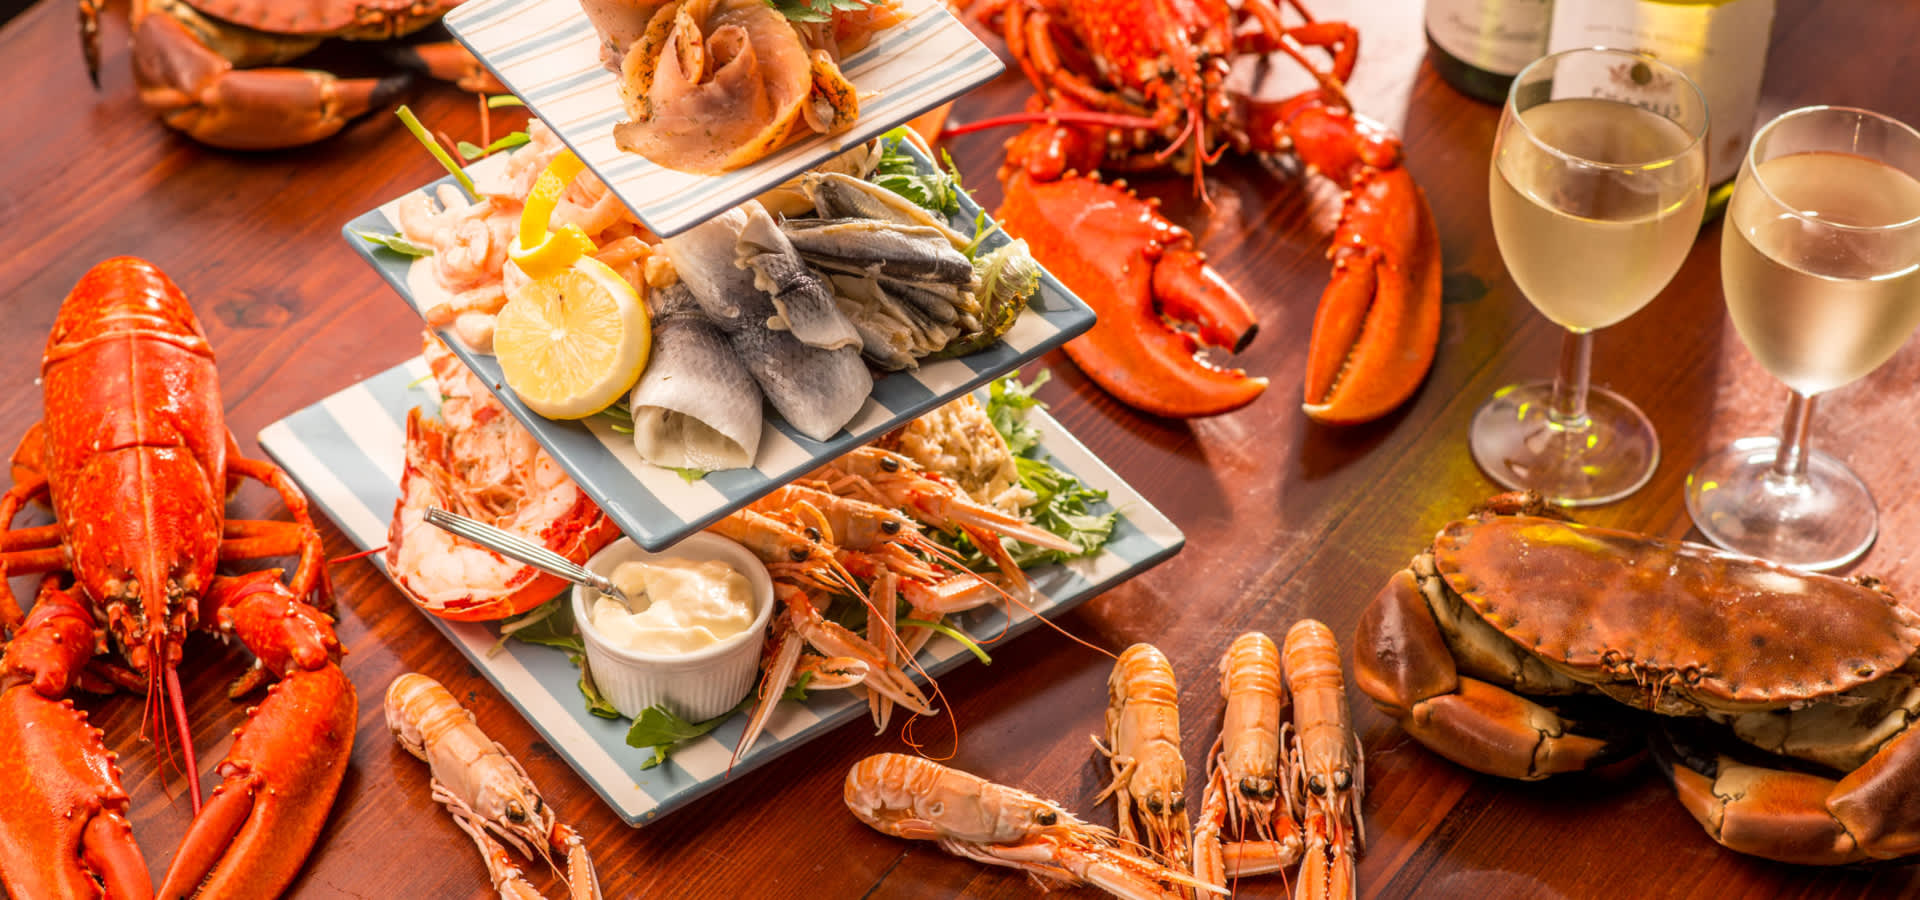 Seafood displayed on a table including Bridlington Bay lobster and crab